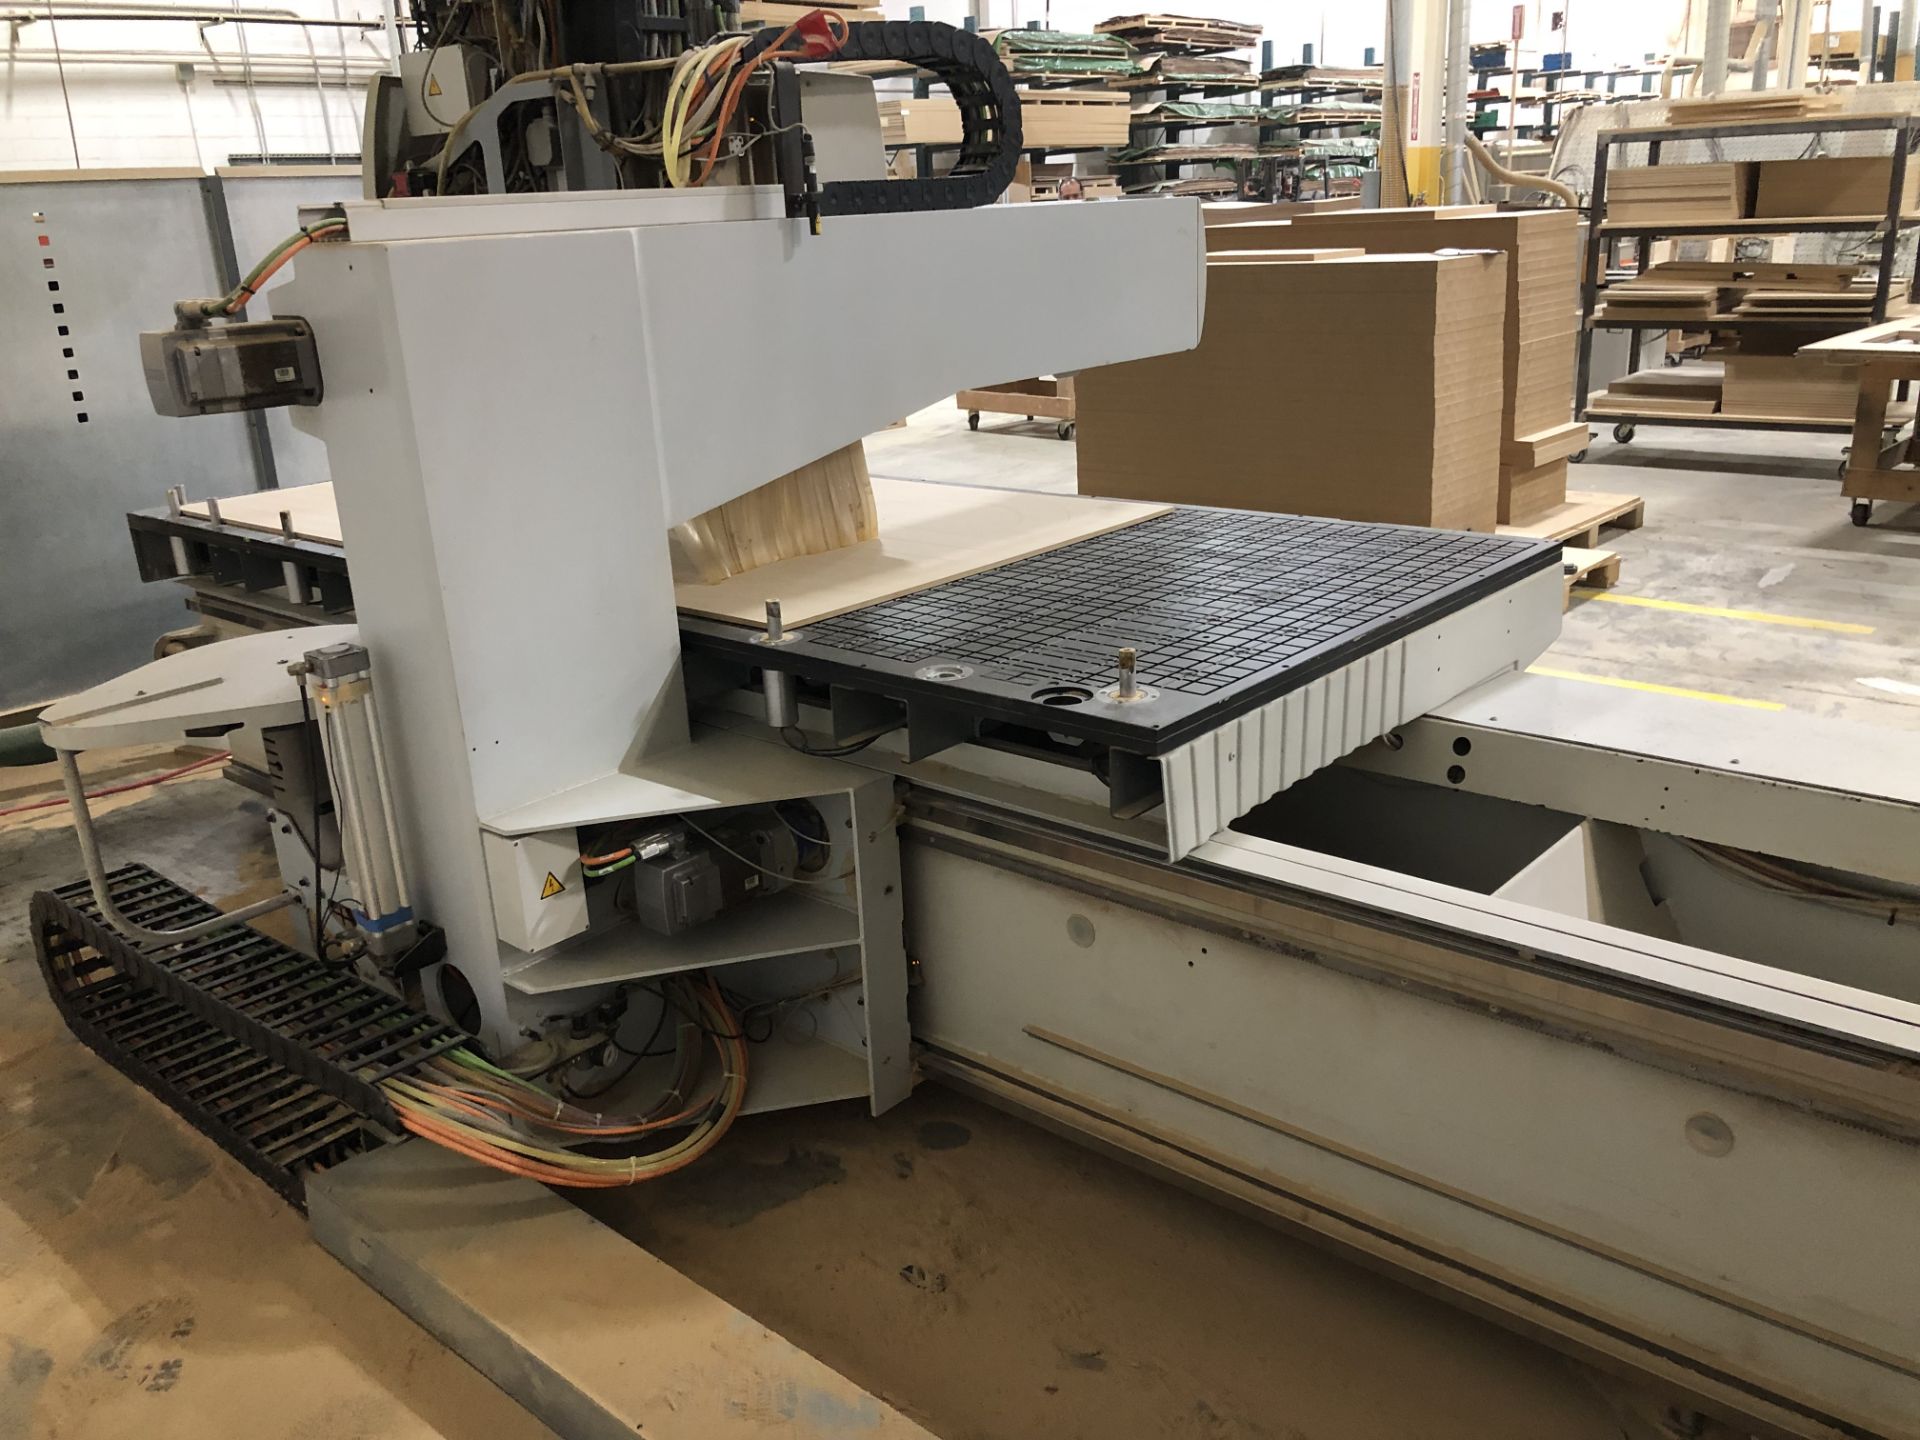 2006 Holz-Her Pro-Master 7123 Flat Table CNC - Image 5 of 13